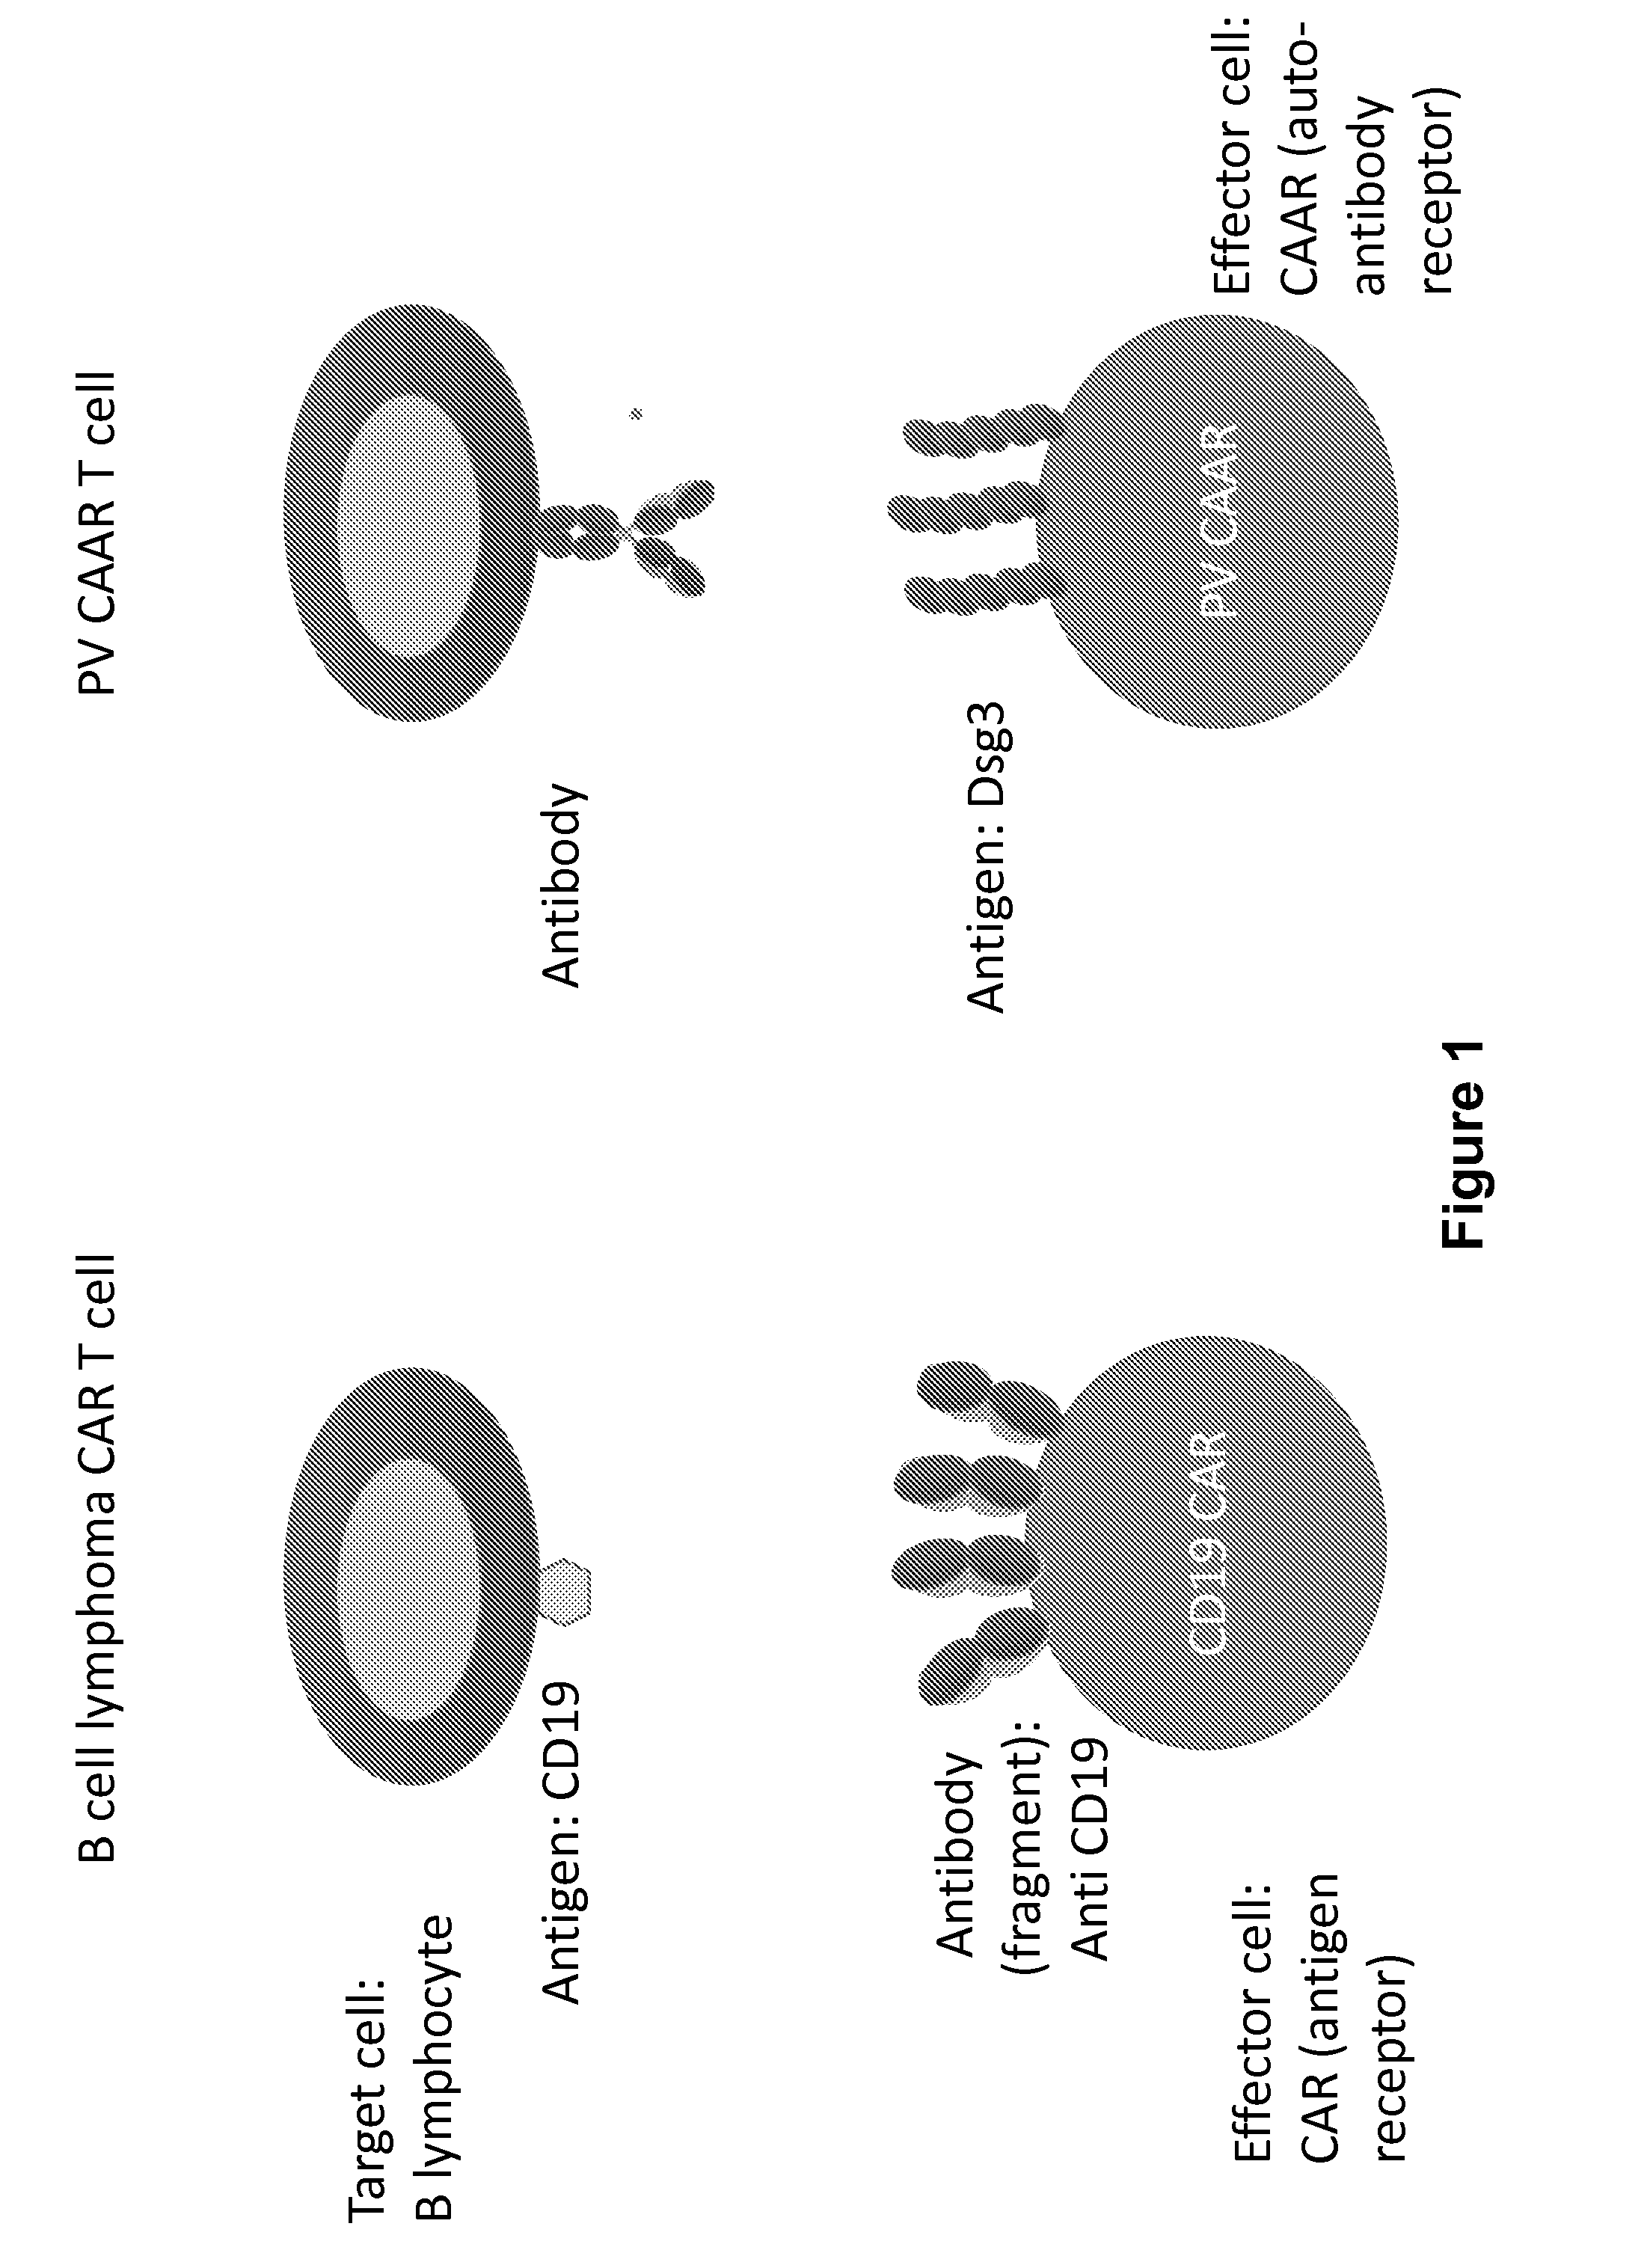 Compositions and methods of chimeric autoantibody receptor t cells